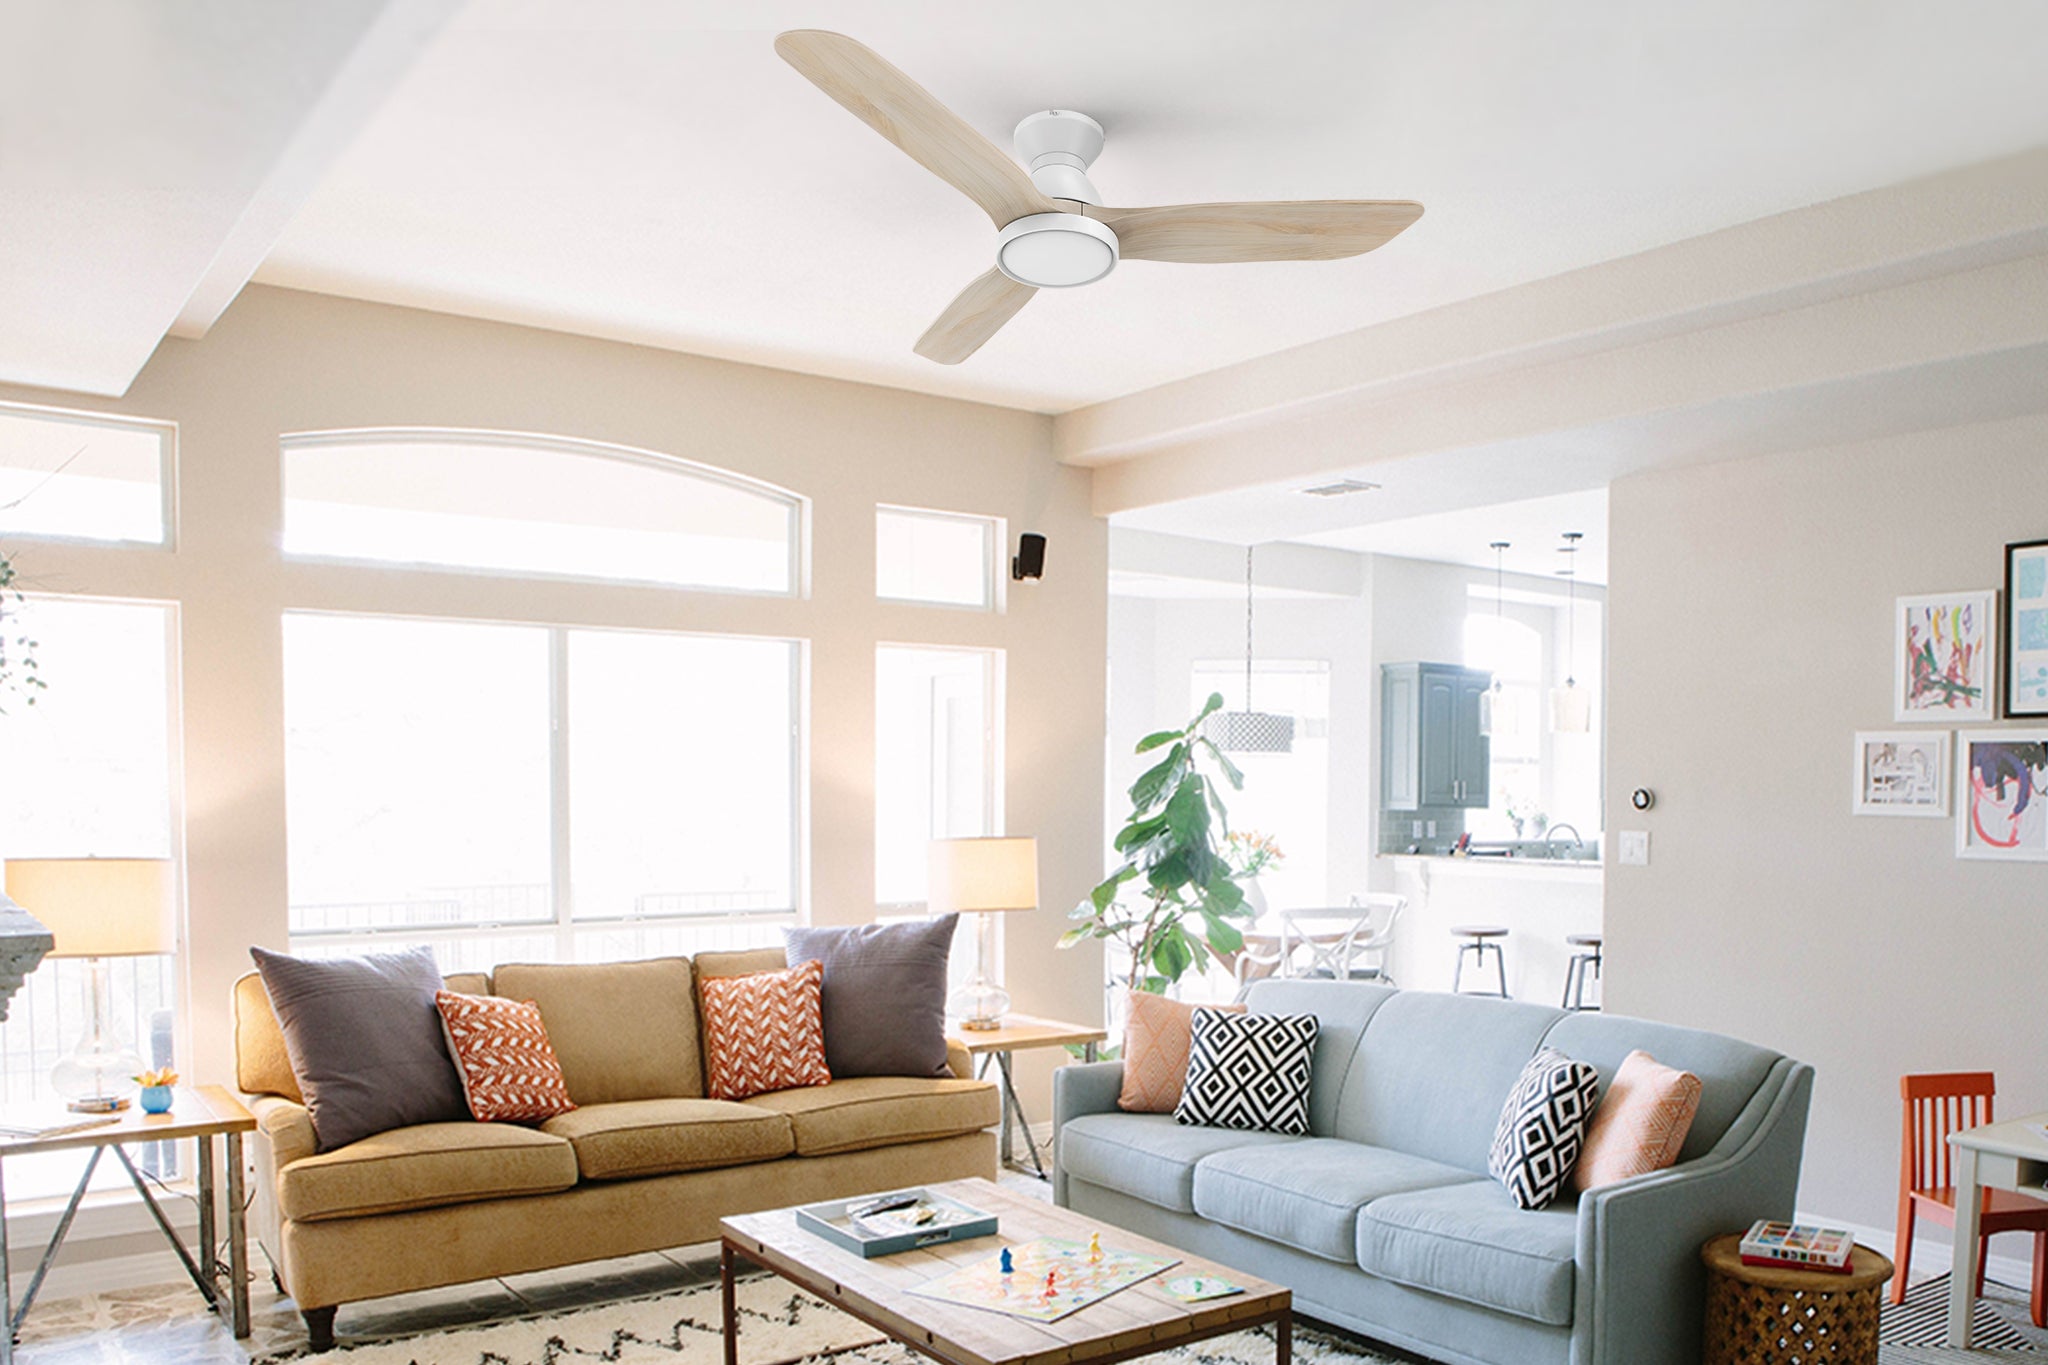 Low-profile ceiling fan with dimmable LED light and remote in living room, matching with modern brown sofa and blue sofa, white lampshade, transparent glass lamp, making the interior more modern design.